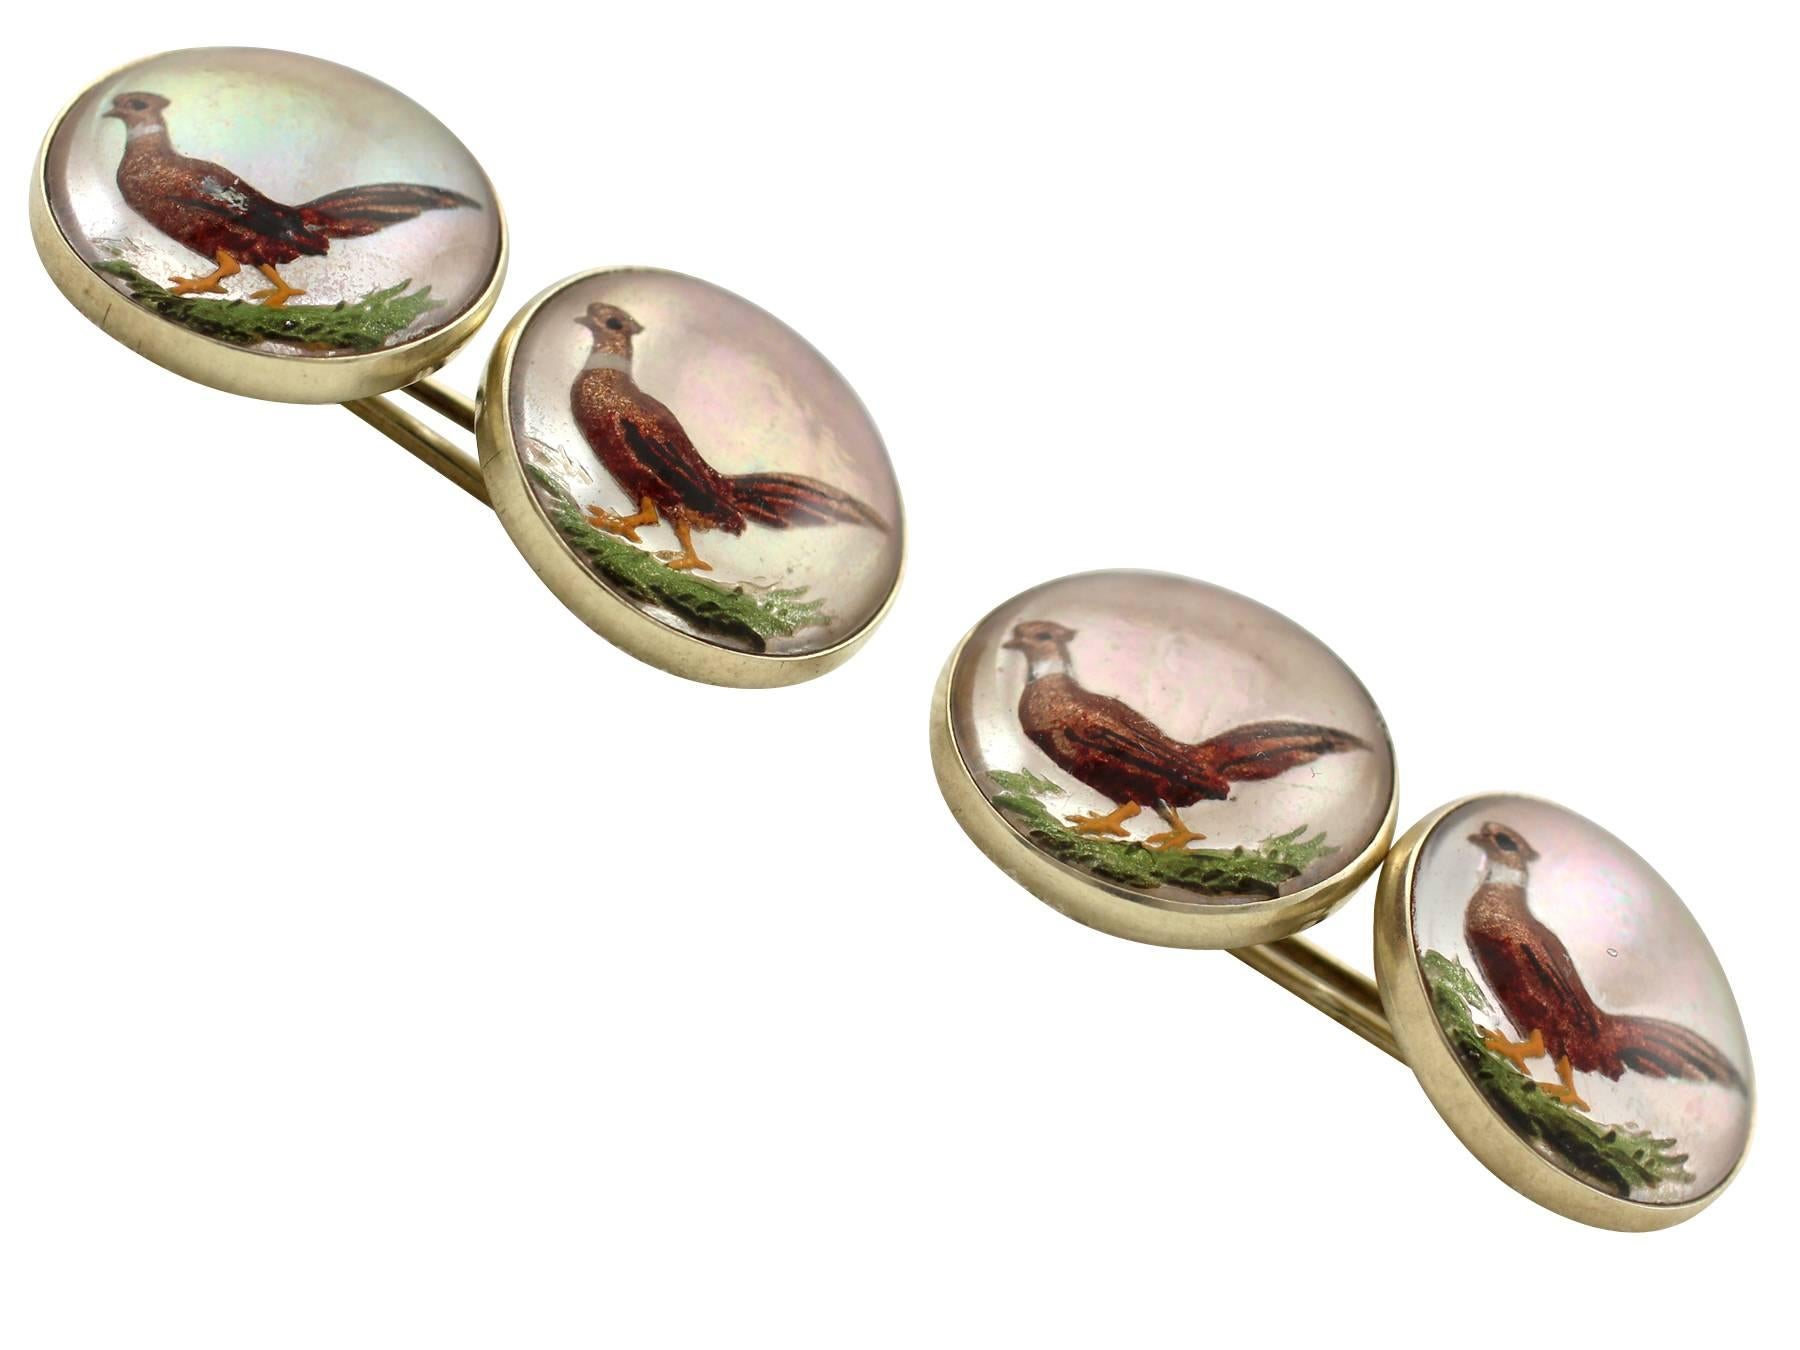 A fine and impressive pair of Victorian essex crystal and 14 karat yellow gold 'Pheasant' cufflinks; part of our diverse antique jewelry and estate jewelry collections

These fine and impressive antique pheasant cufflinks have been crafted in 14k